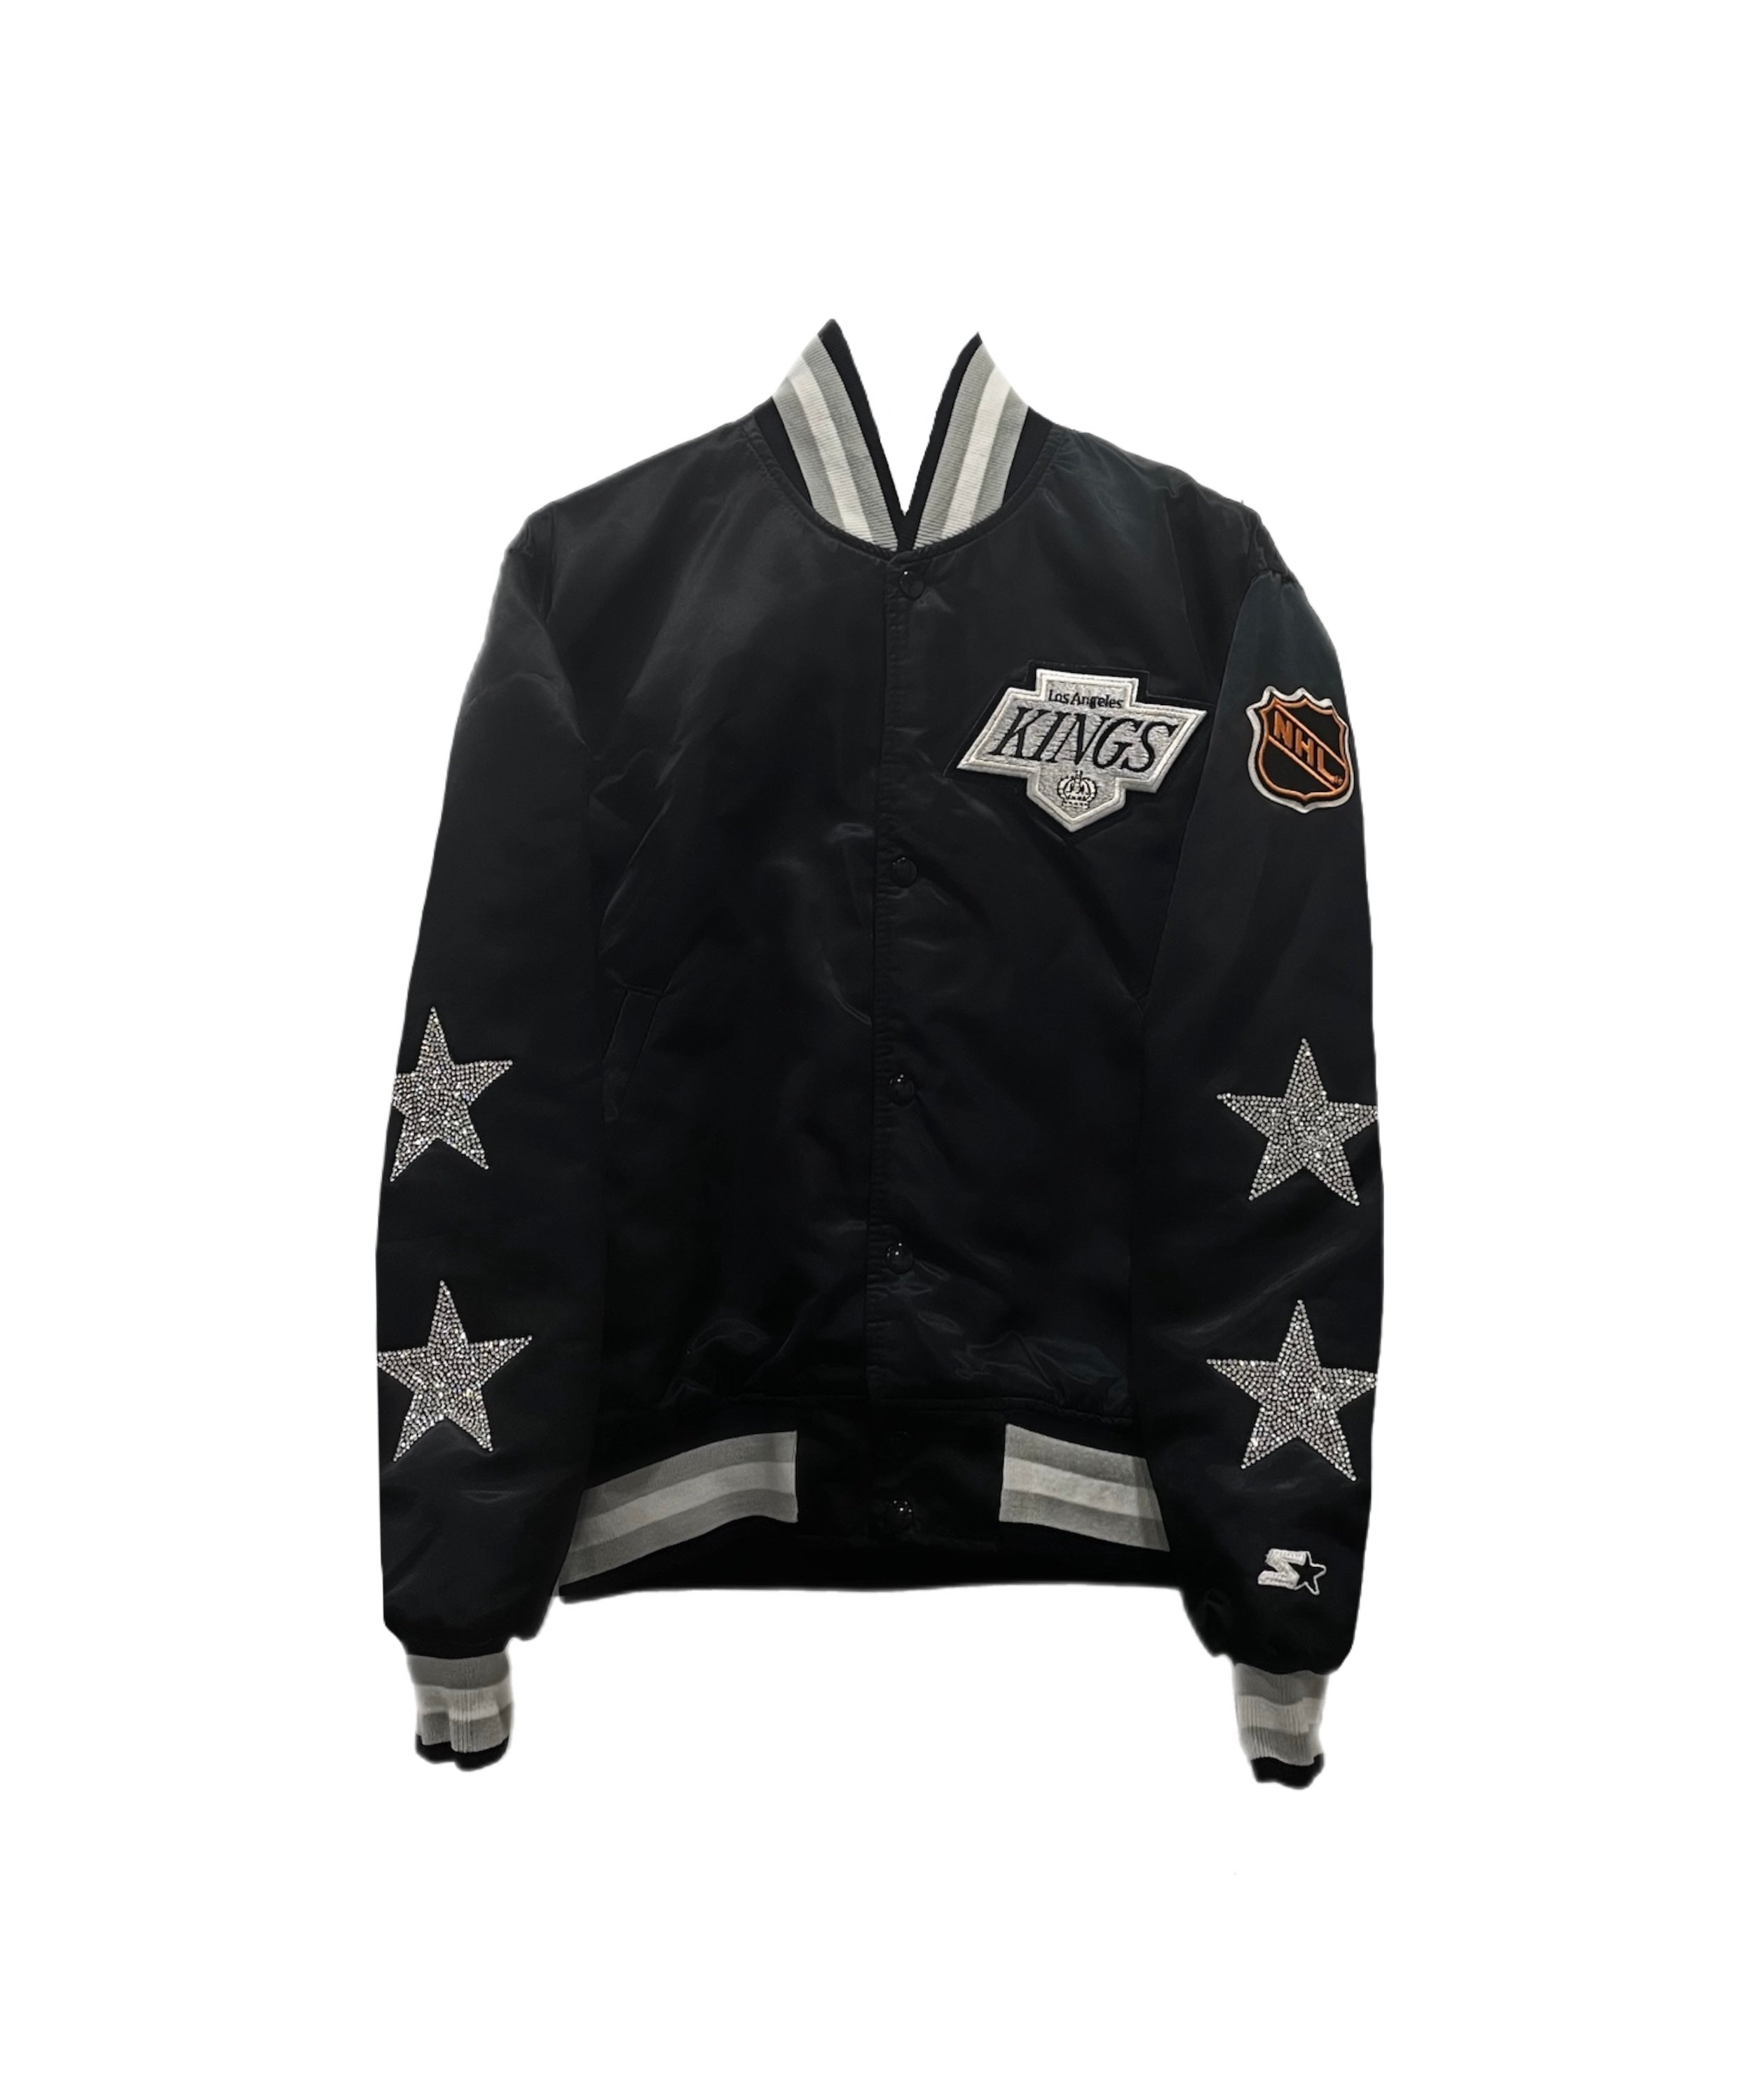 La Lakers, NBA One of A Kind Vintage Jacket with Crystal Star Design